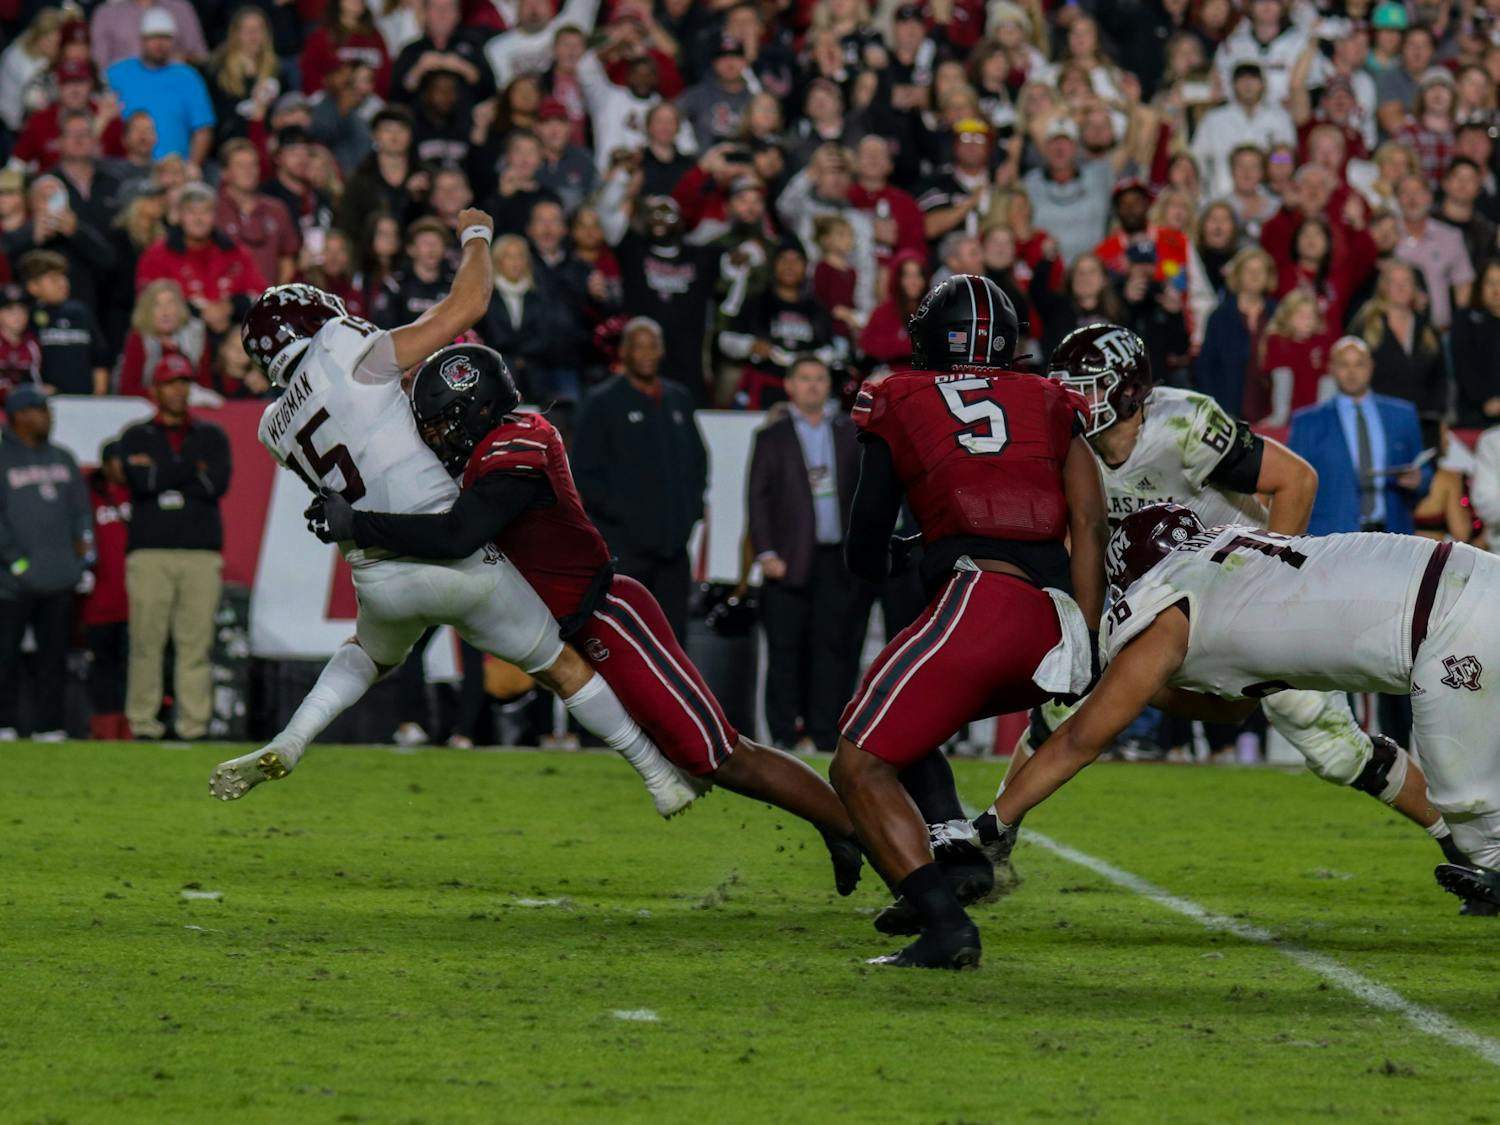 Redshirt sophomore edge Gilber Edmond rushes and almost sacks the quarterback for the Texas A&amp;M Aggies during the fourth quarter at Williams-Brice Stadium on Oct. 22, 2022. South Carolina defeated Texas A&amp;M 30-24.